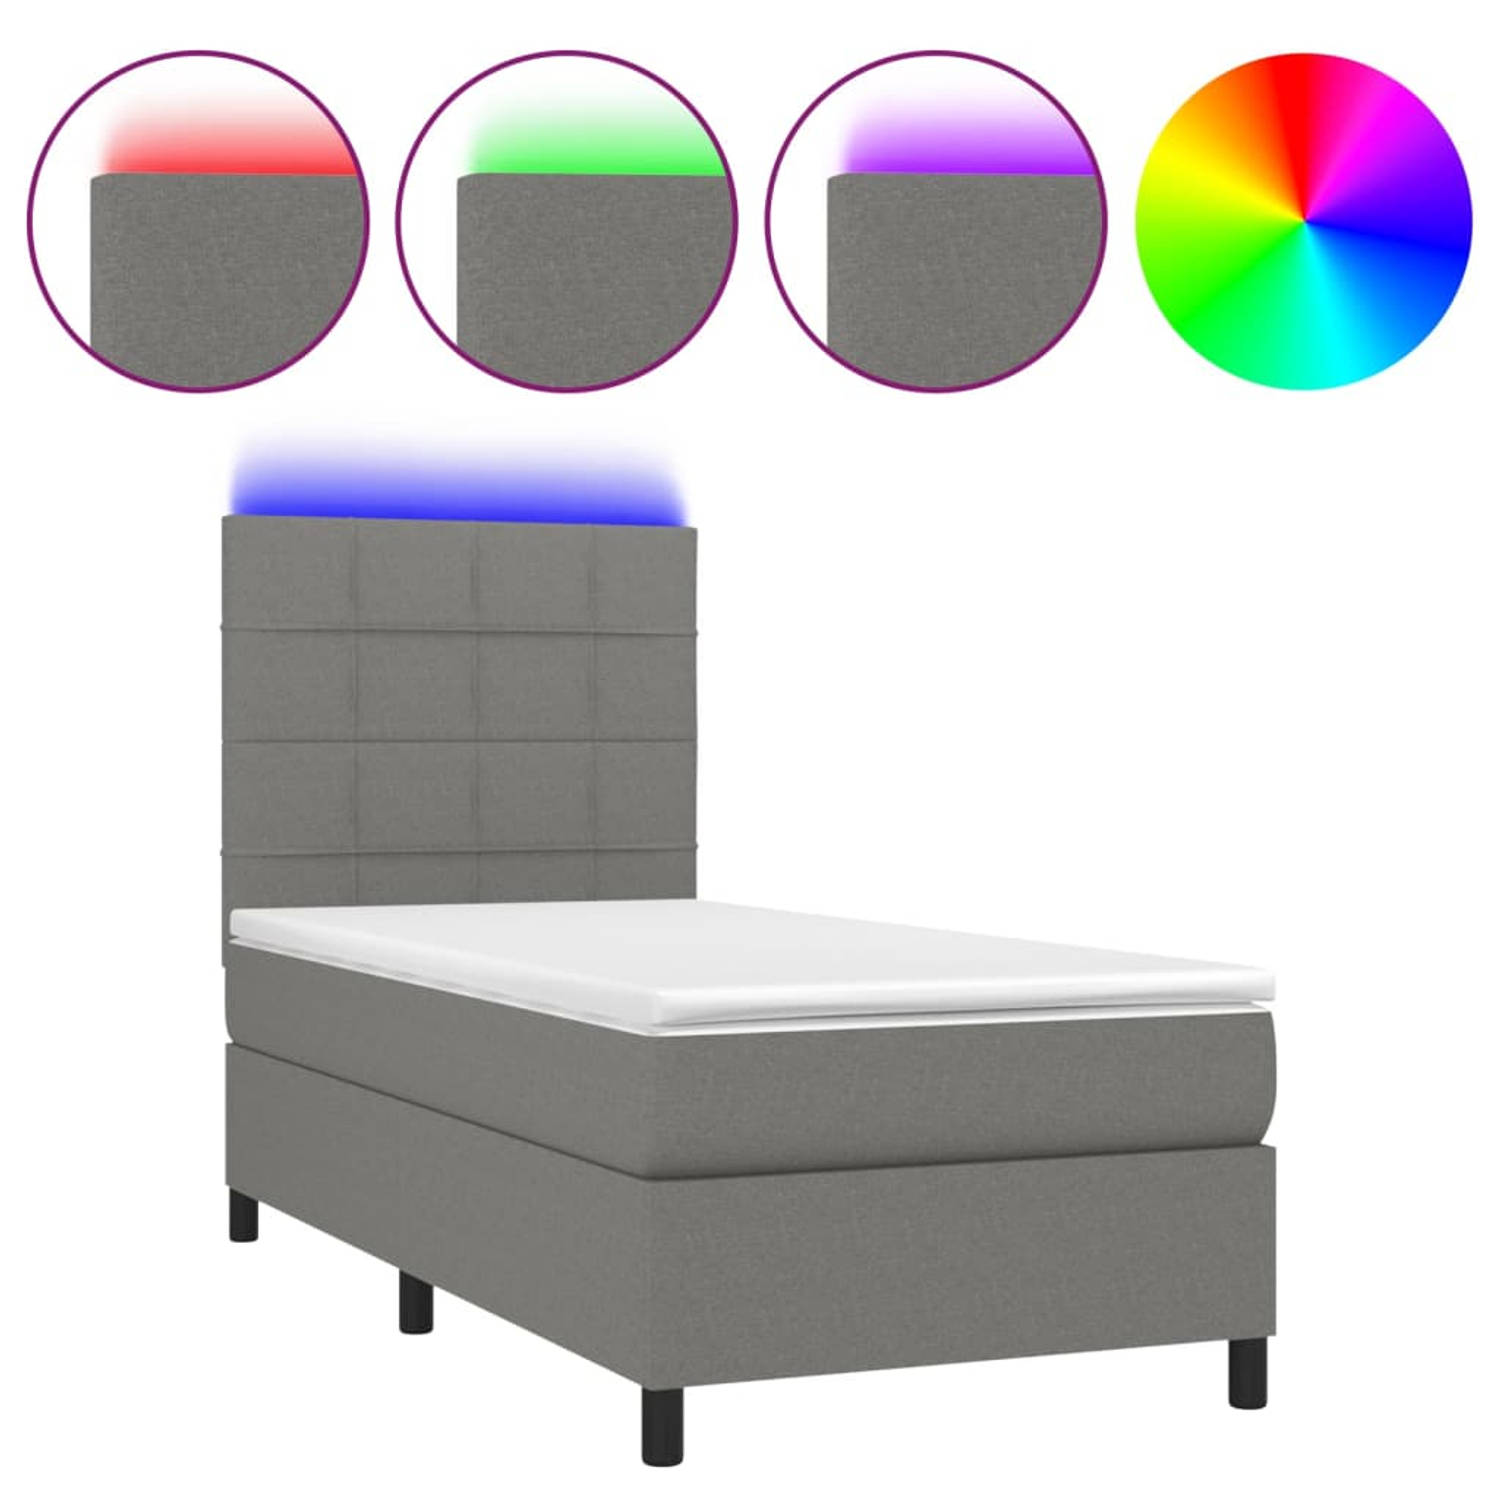 The Living Store Boxspring Bed - Donkergrijs - 203x90x118/128 cm - LED verlichting